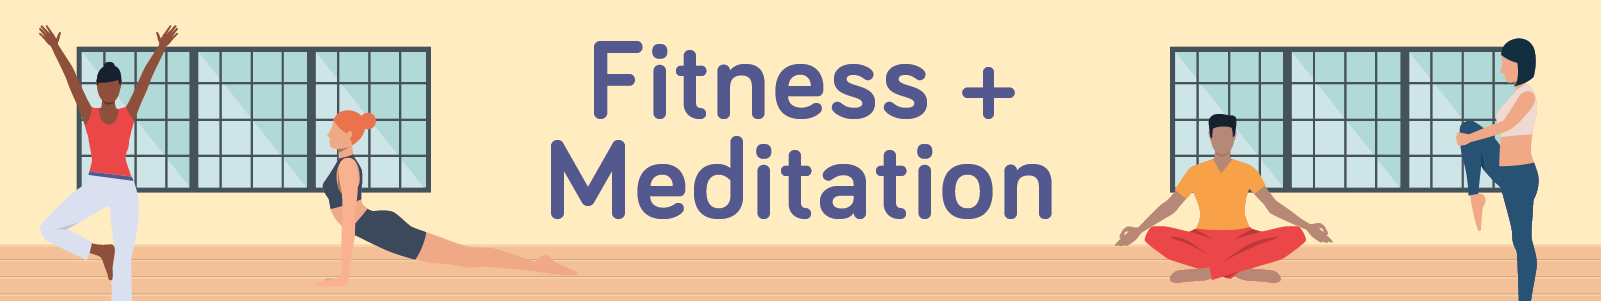 Fitness and Meditation graphic banner